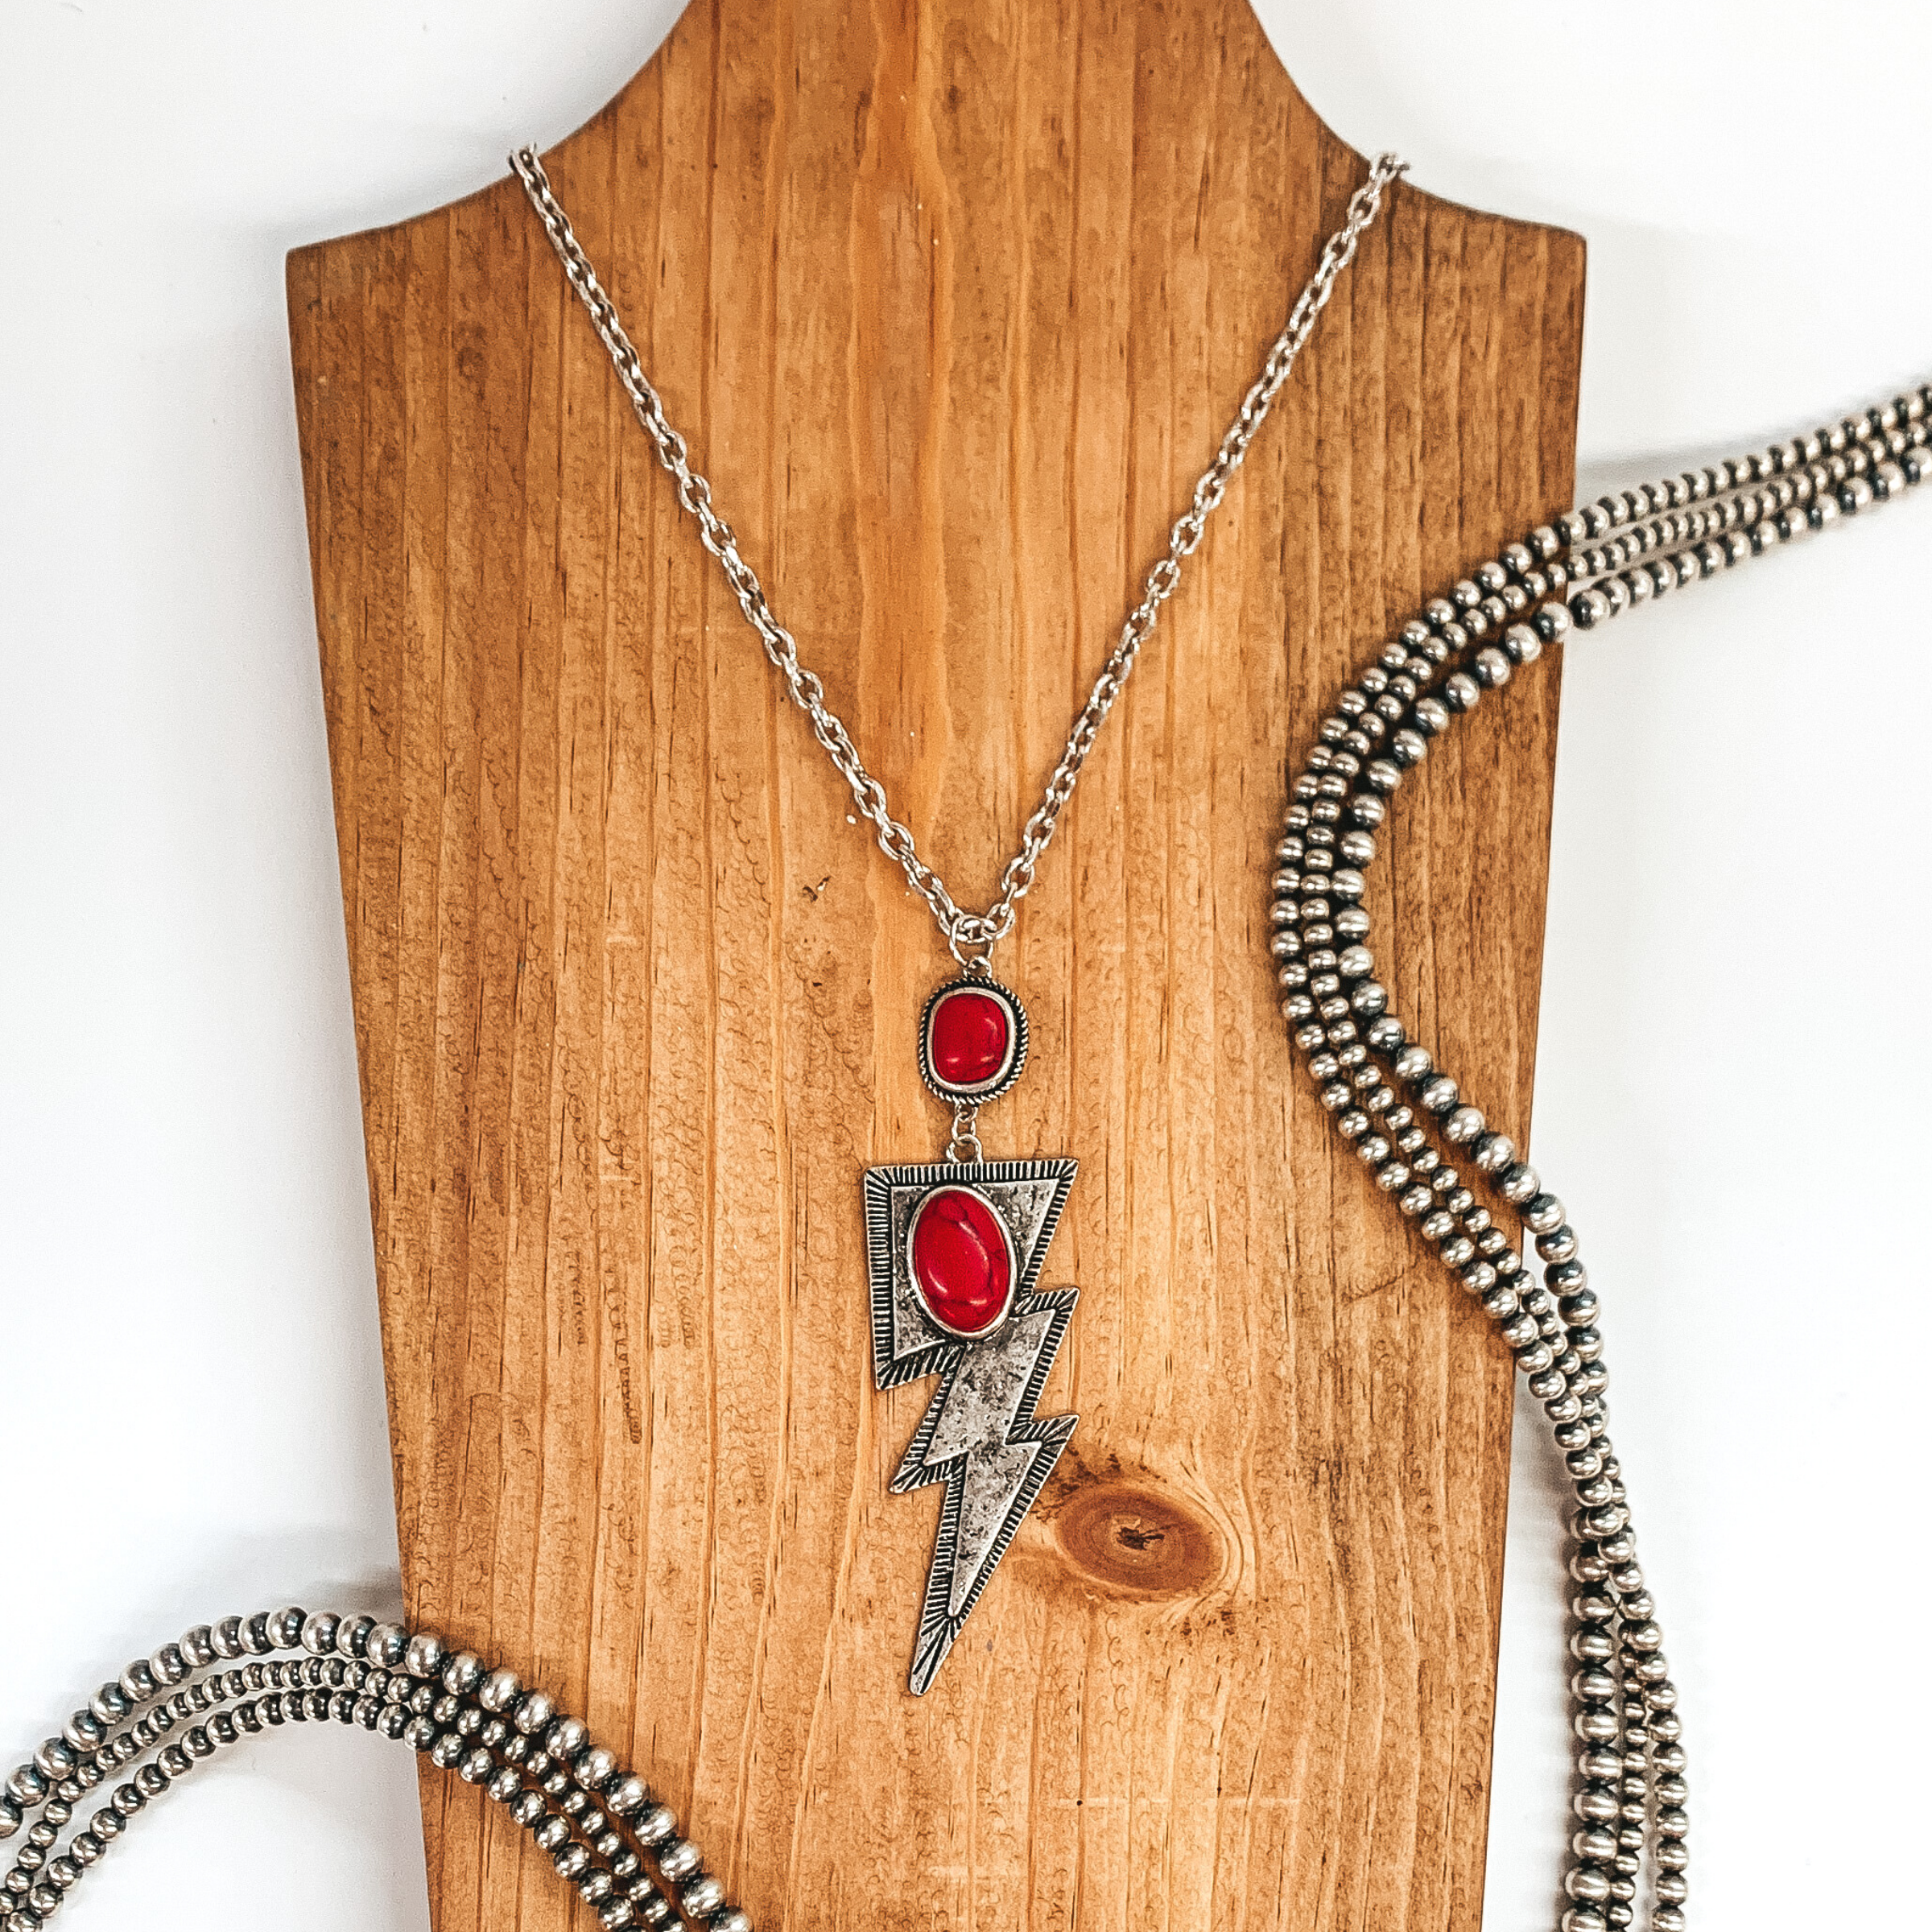 Silver chained necklace with hanging square pendant with red stone and hanging silver lightning bolt pendant with oval red colored stone. This necklace is pictured laying on a tan necklace holder on a white background. This picture includes silver beads as decoration. 